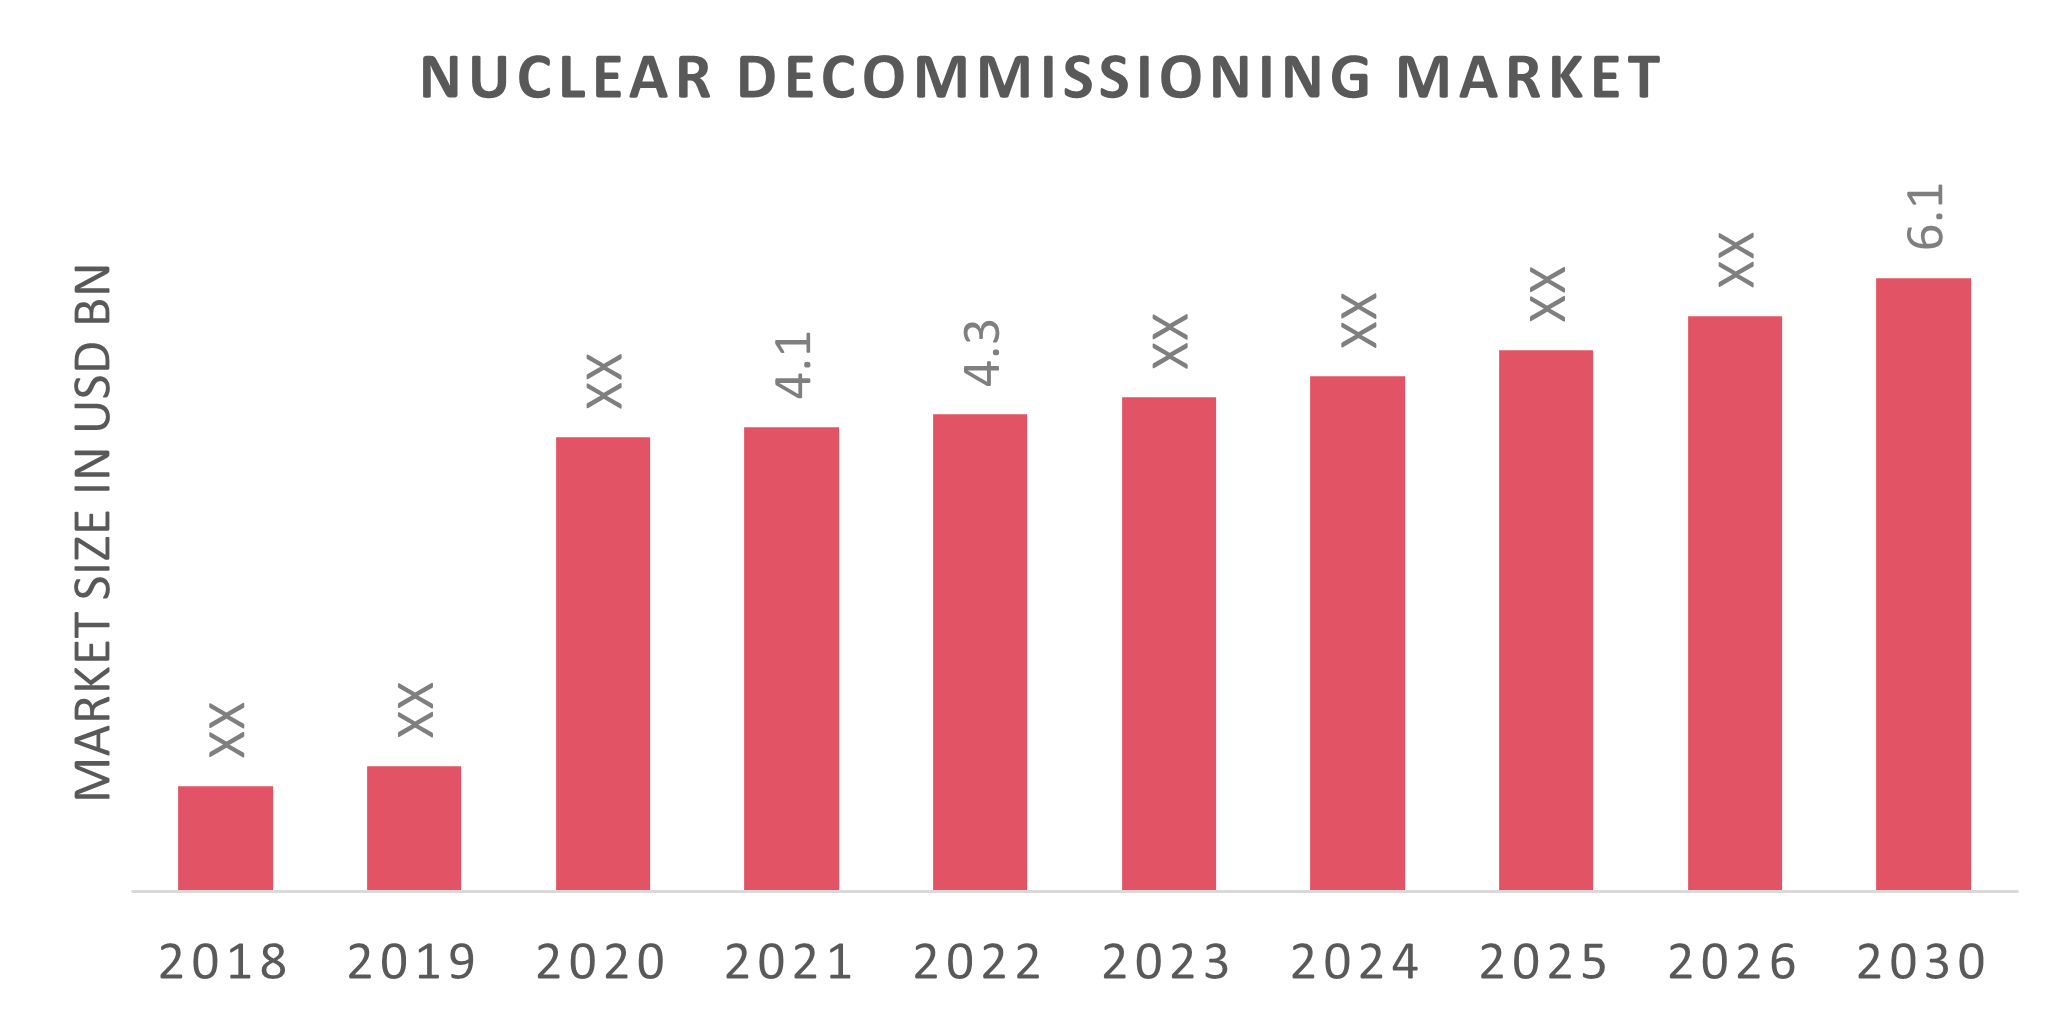 Global Nuclear Decommissioning Market Overview